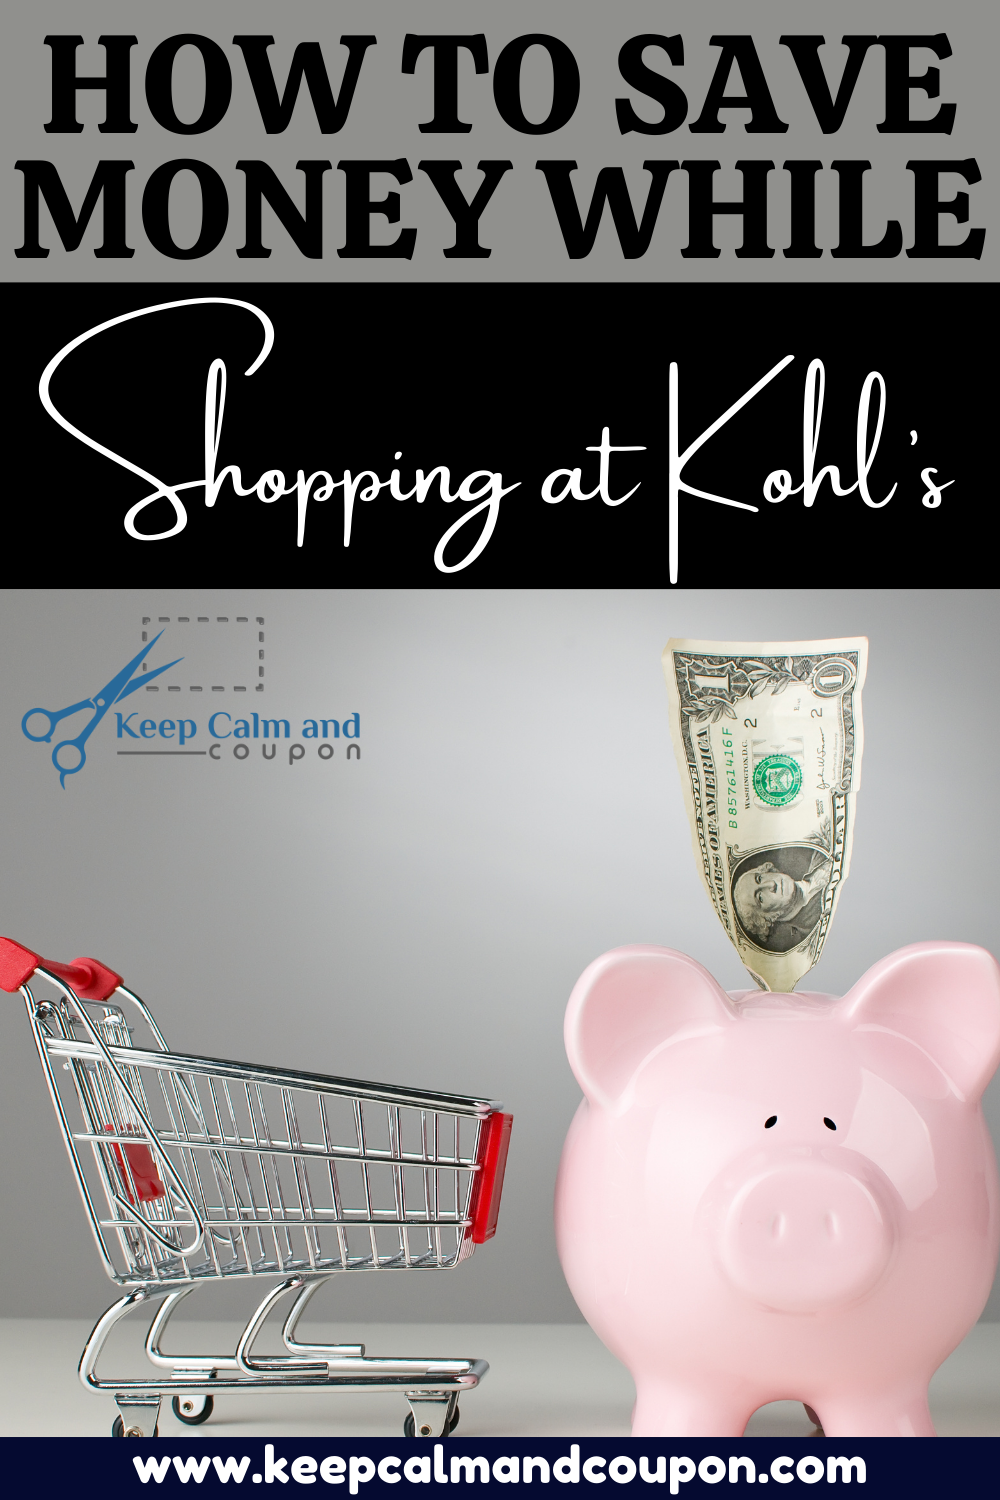 How to Save Money While Shopping at Kohl’s